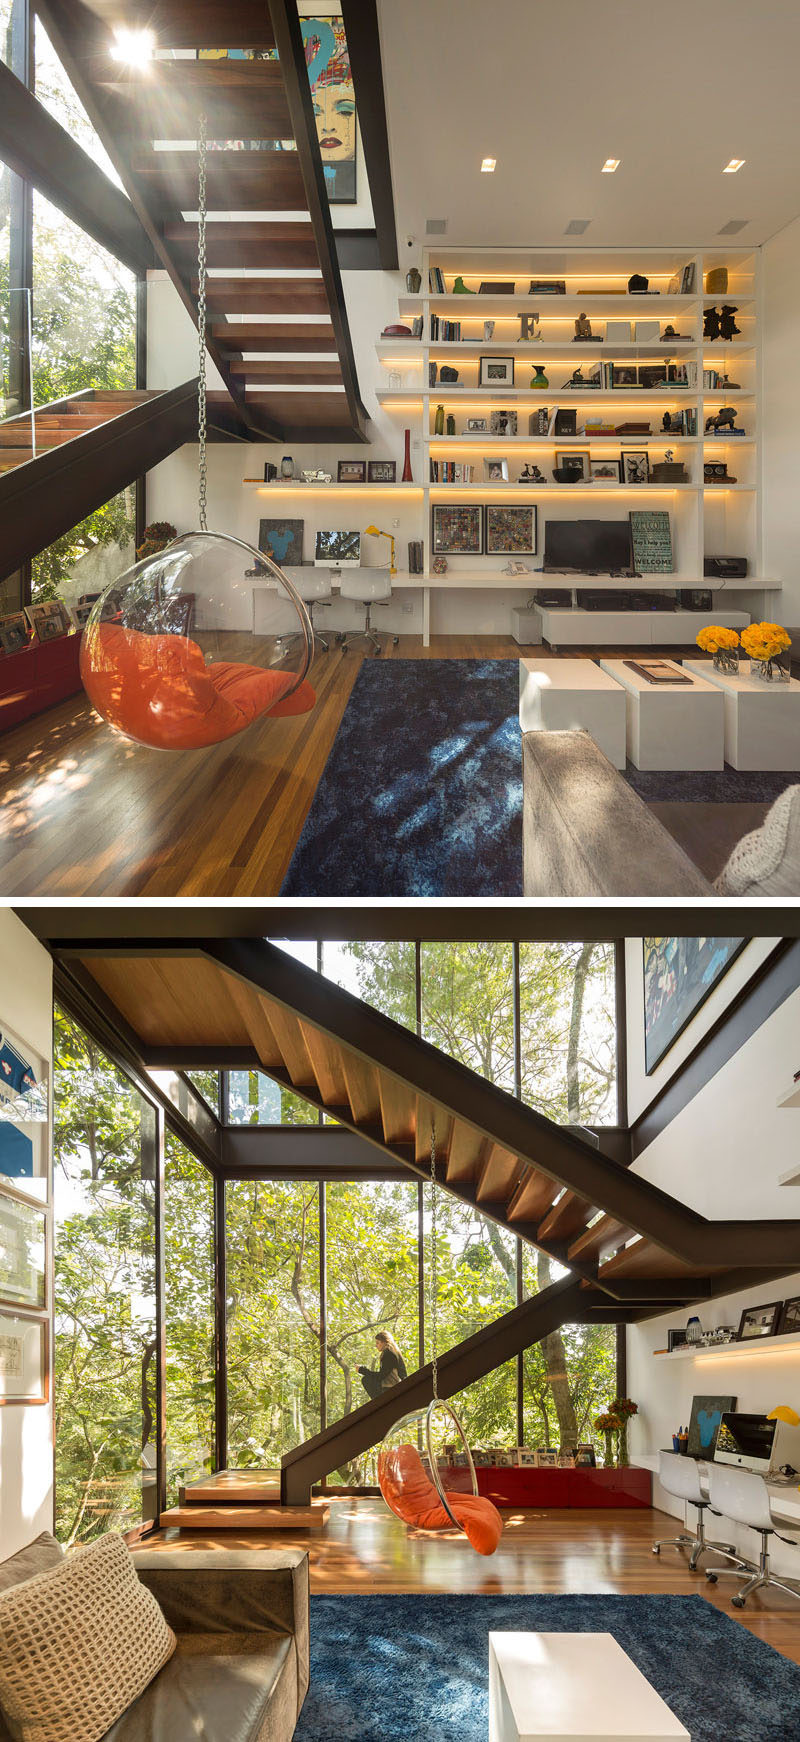 These wood and steel stairs are perfect for sitting on and looking out the floor-to-ceiling windows.